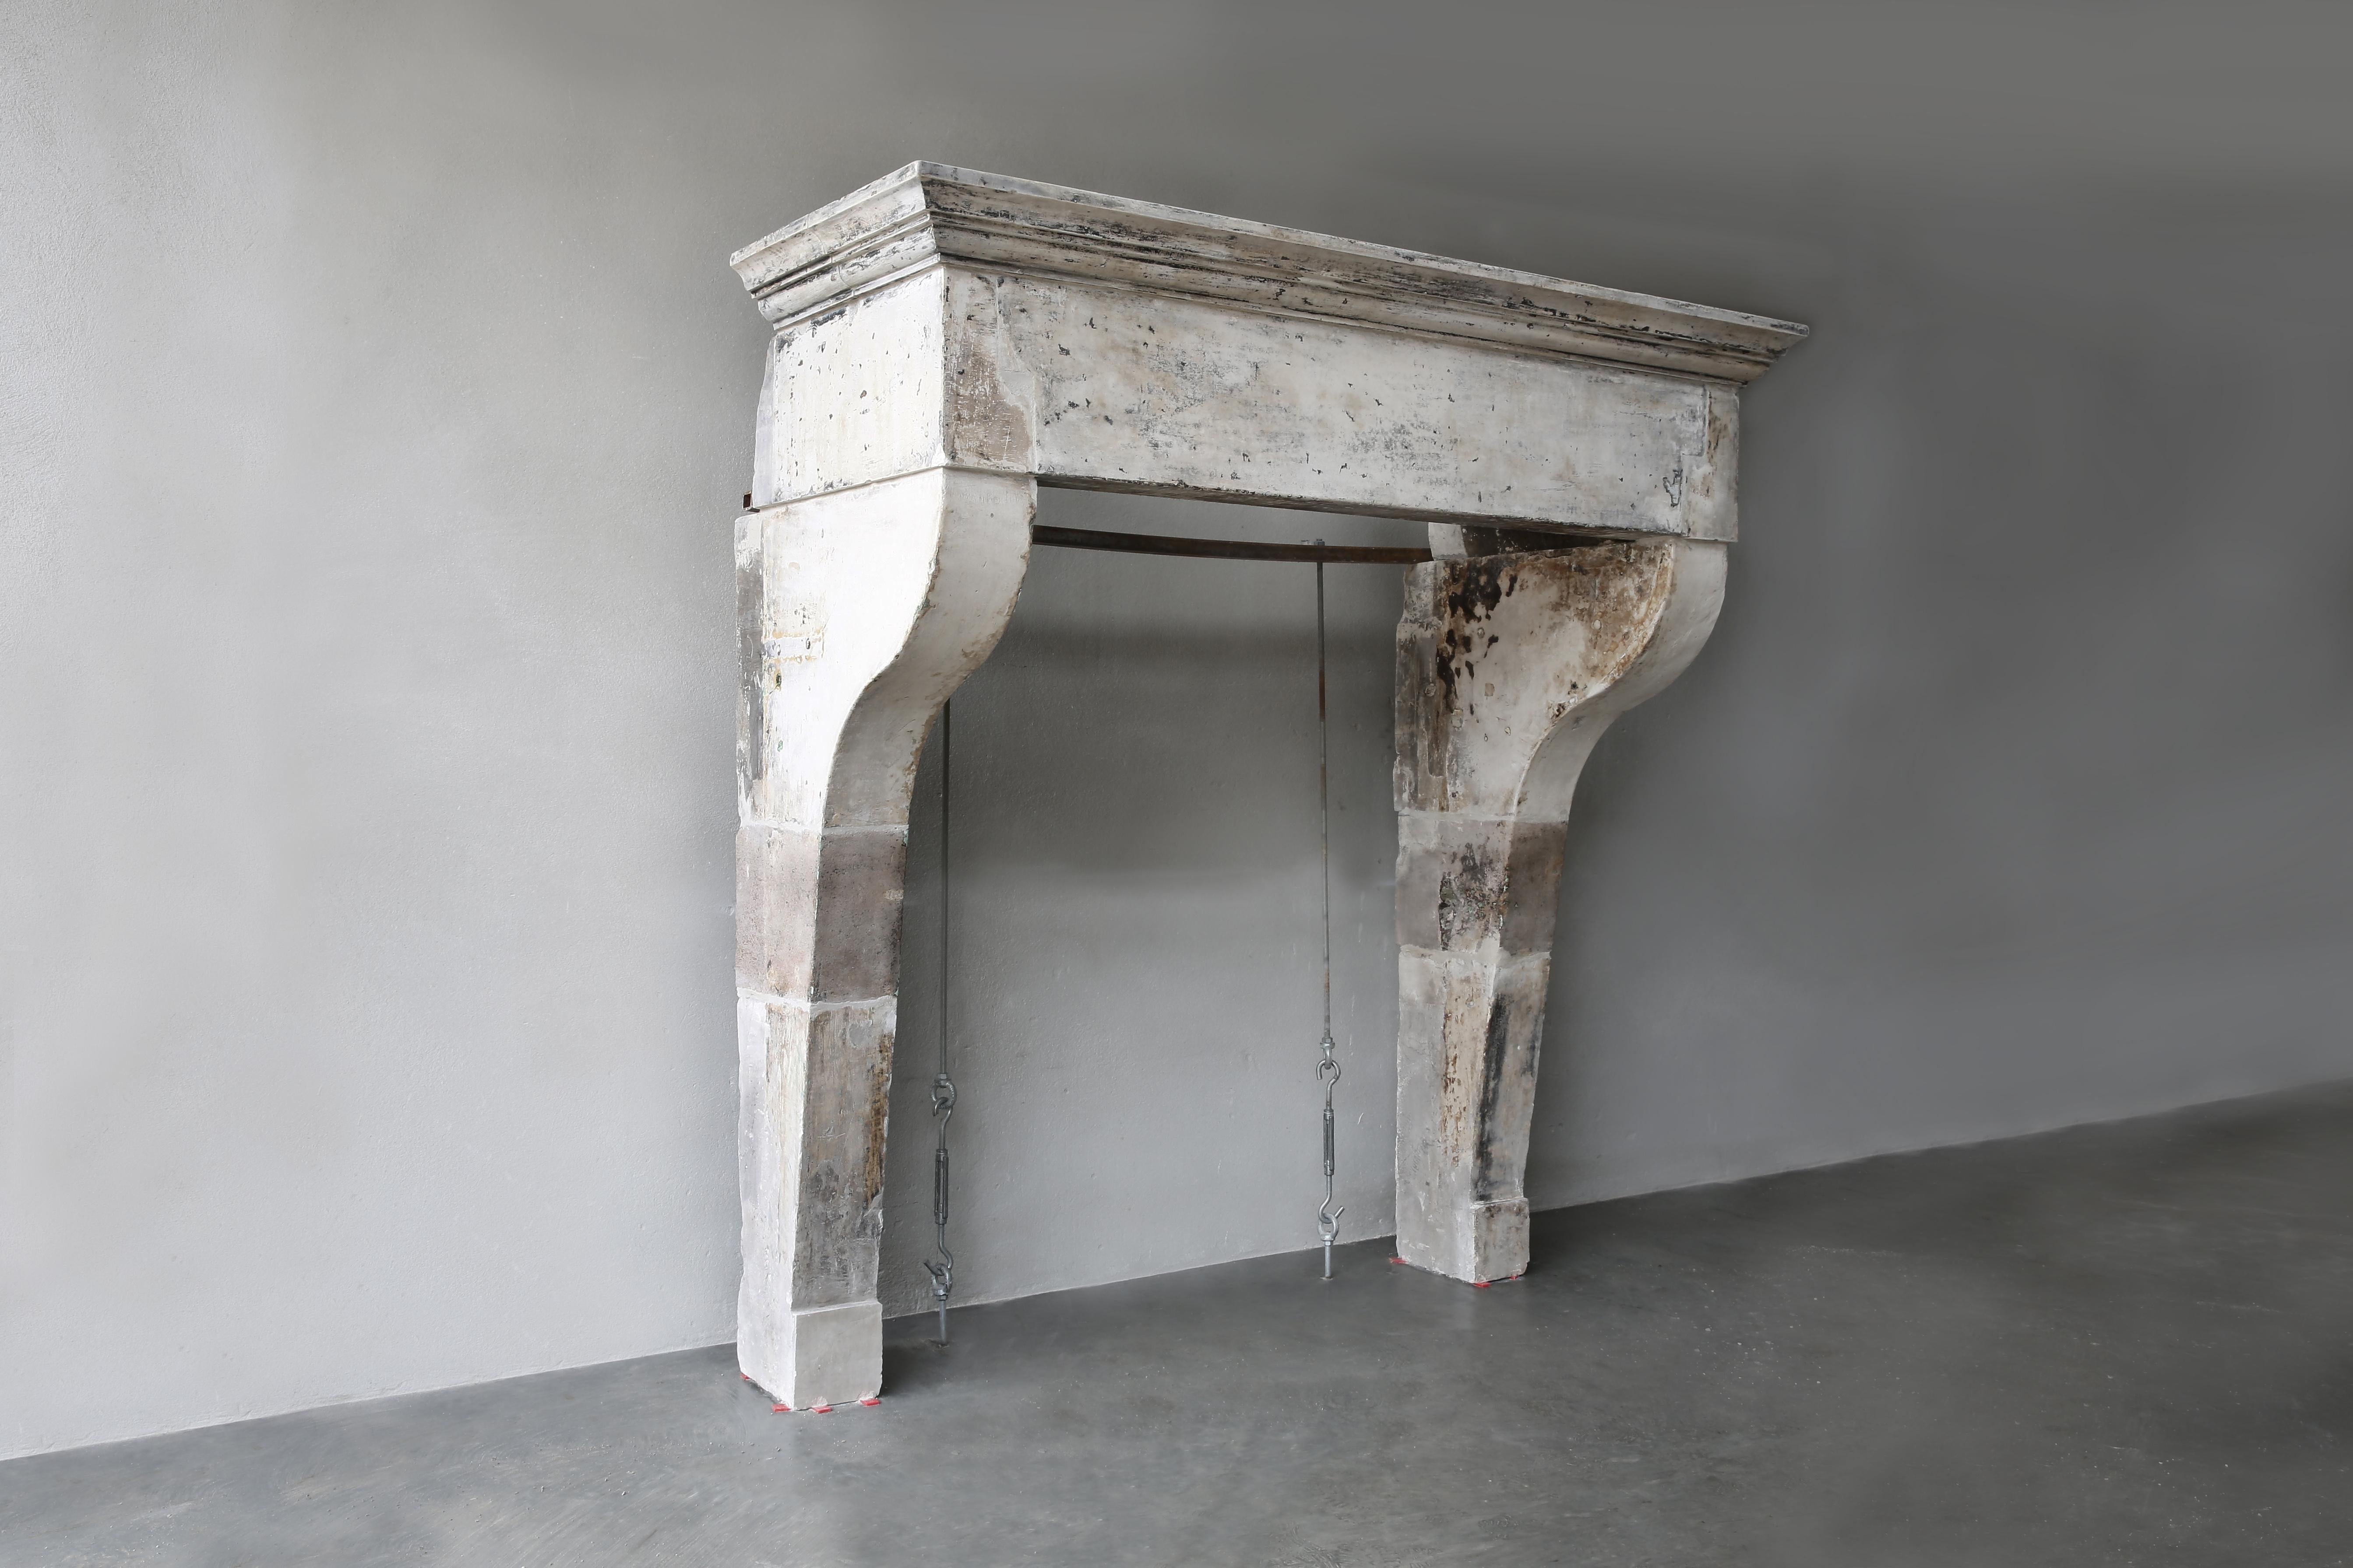 Antique fireplace of French limestone from the 18th century in Campagnarde style. This one comes from Beaune in France. A beautiful robust fireplace with a wide top and slender legs that are slightly curved. This robust fireplace has a rural design